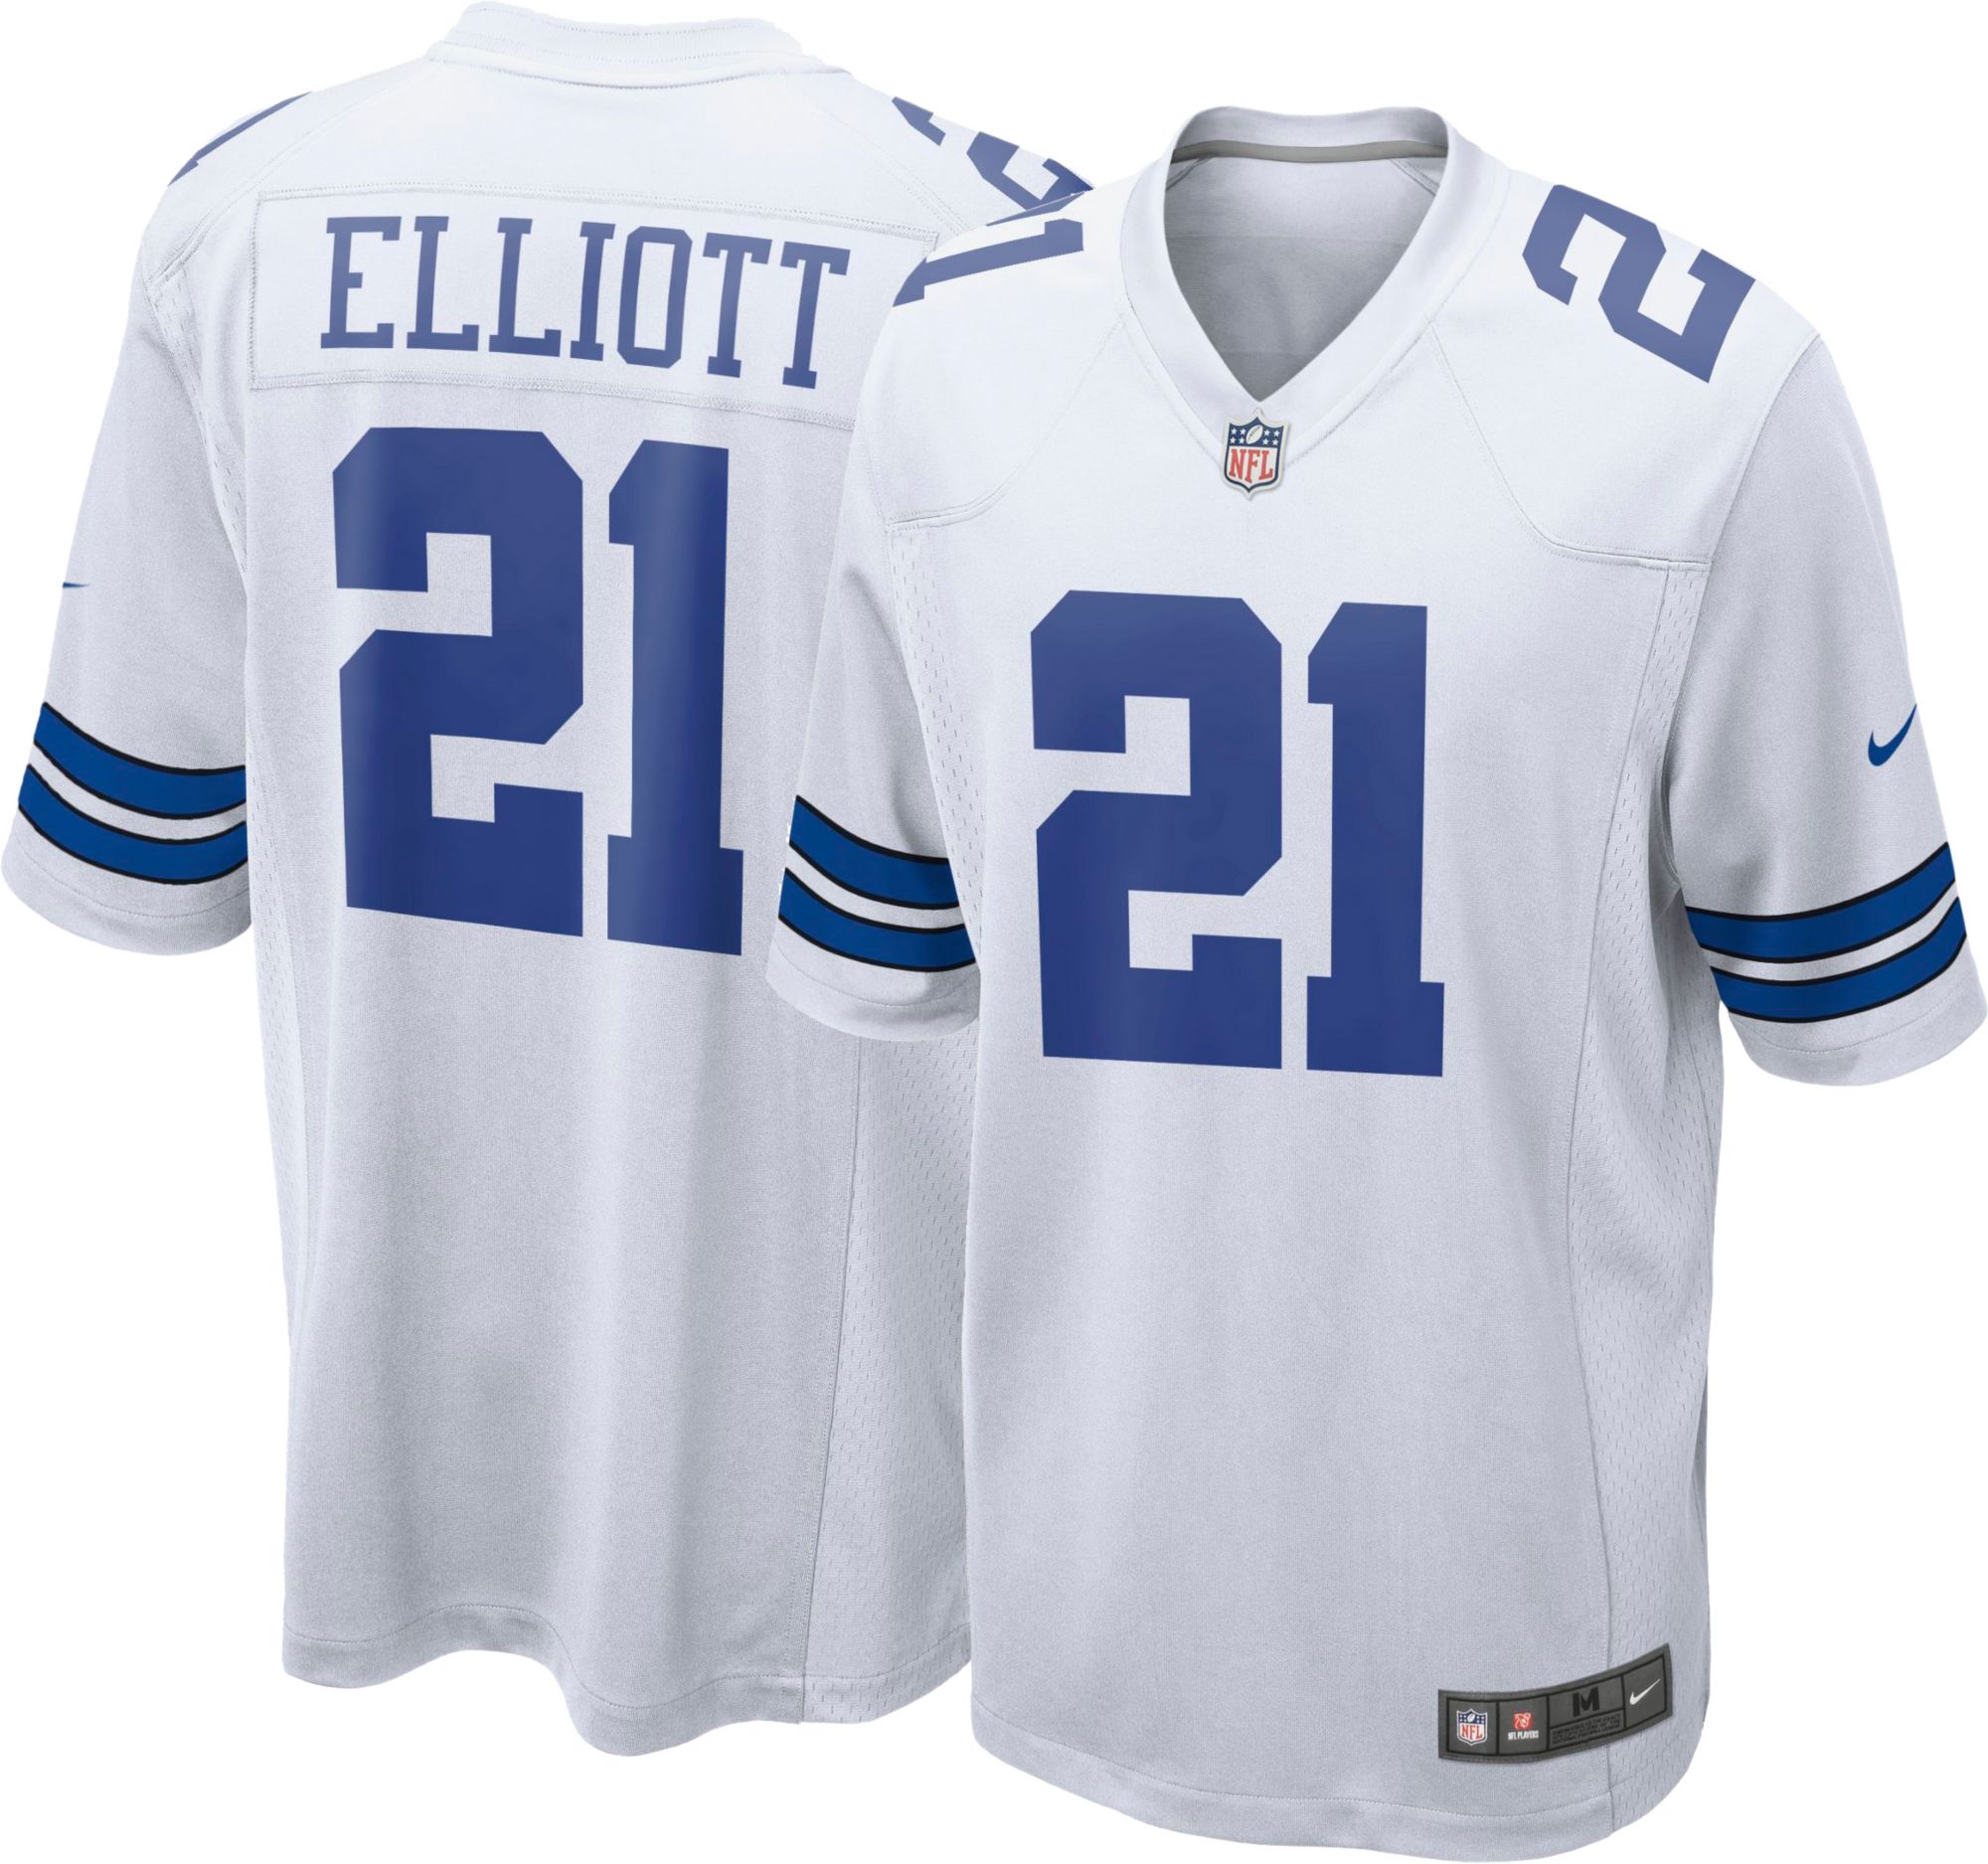 cowboys jersey for sale